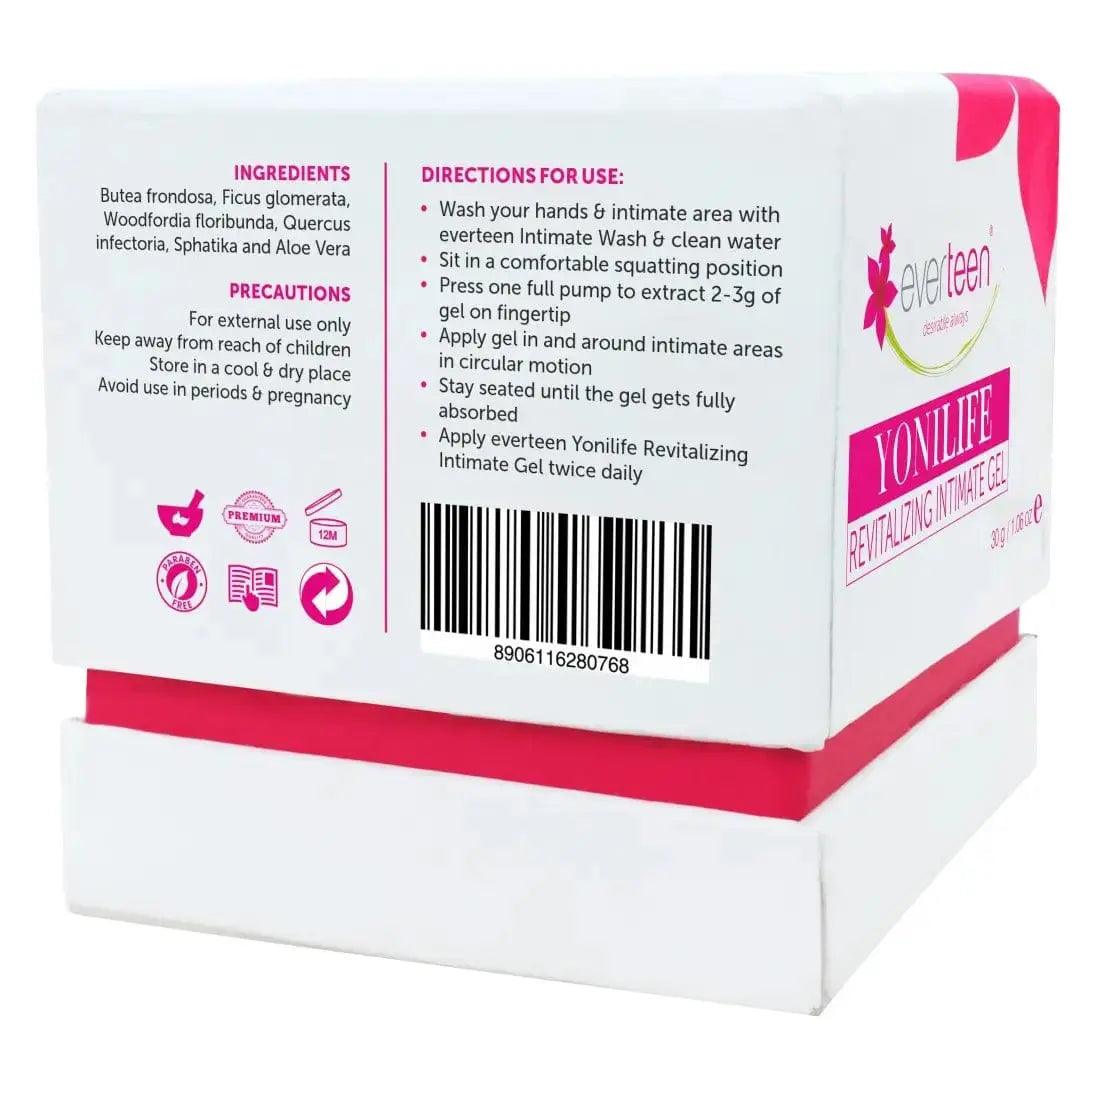 everteen Yonilife Gel for Revitalizing Intimate Parts in Women - 30g